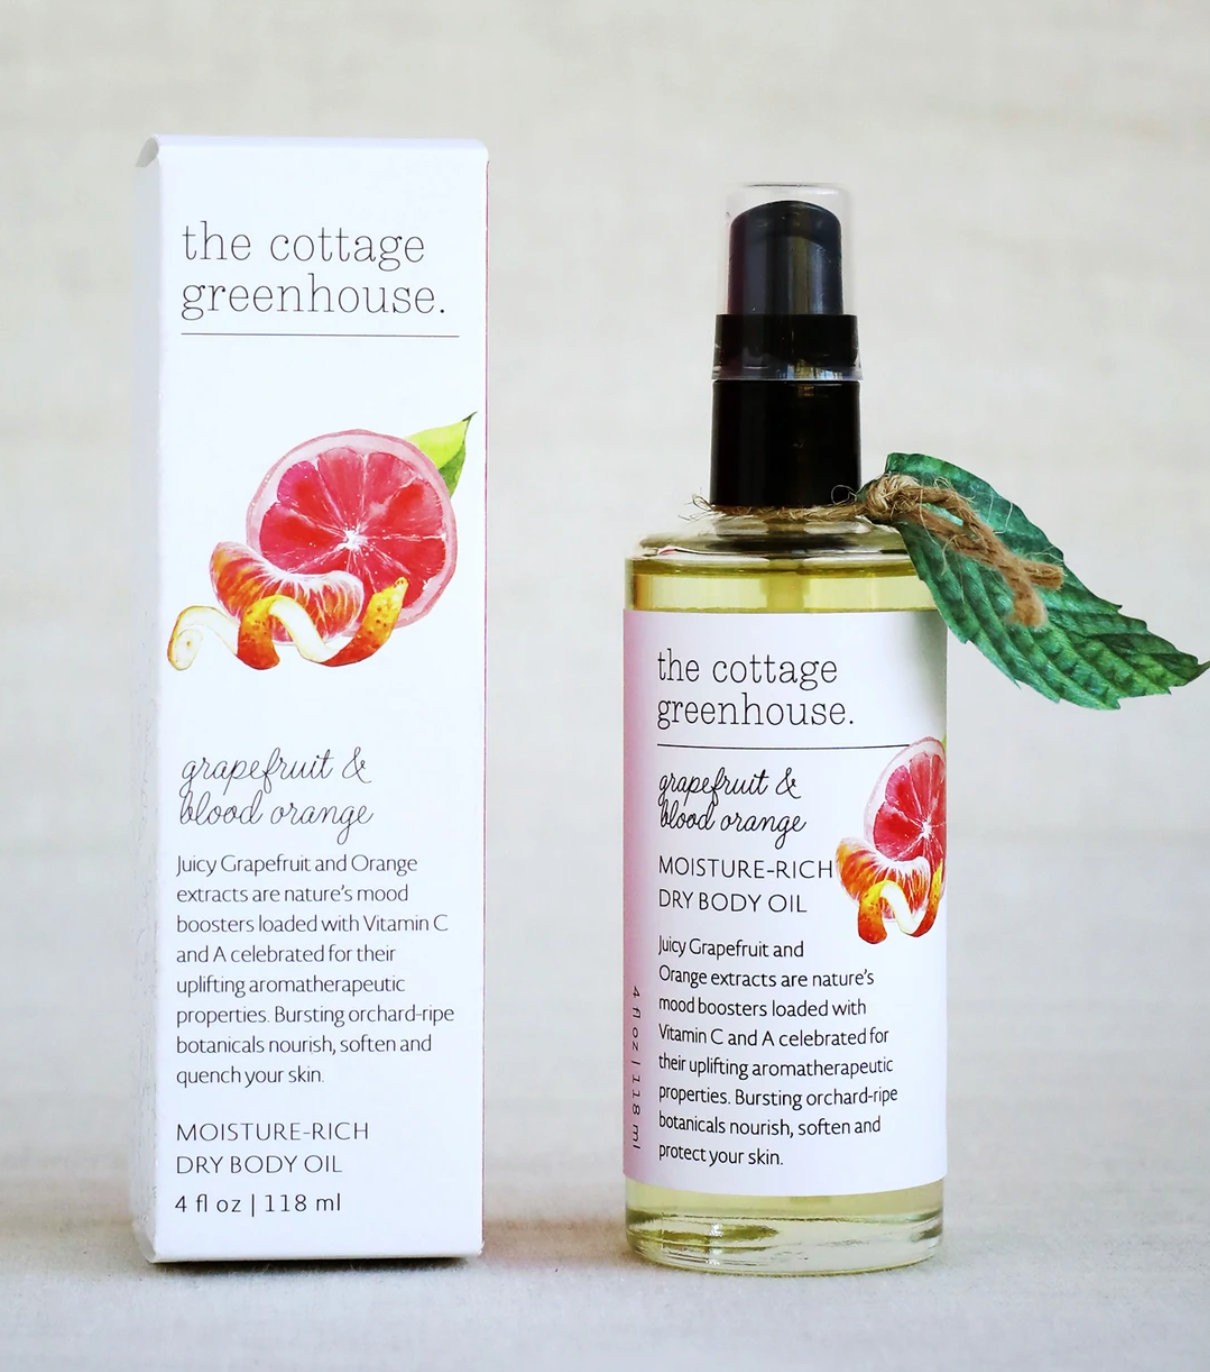 The Cottage Greenhouse Dry Body Oil